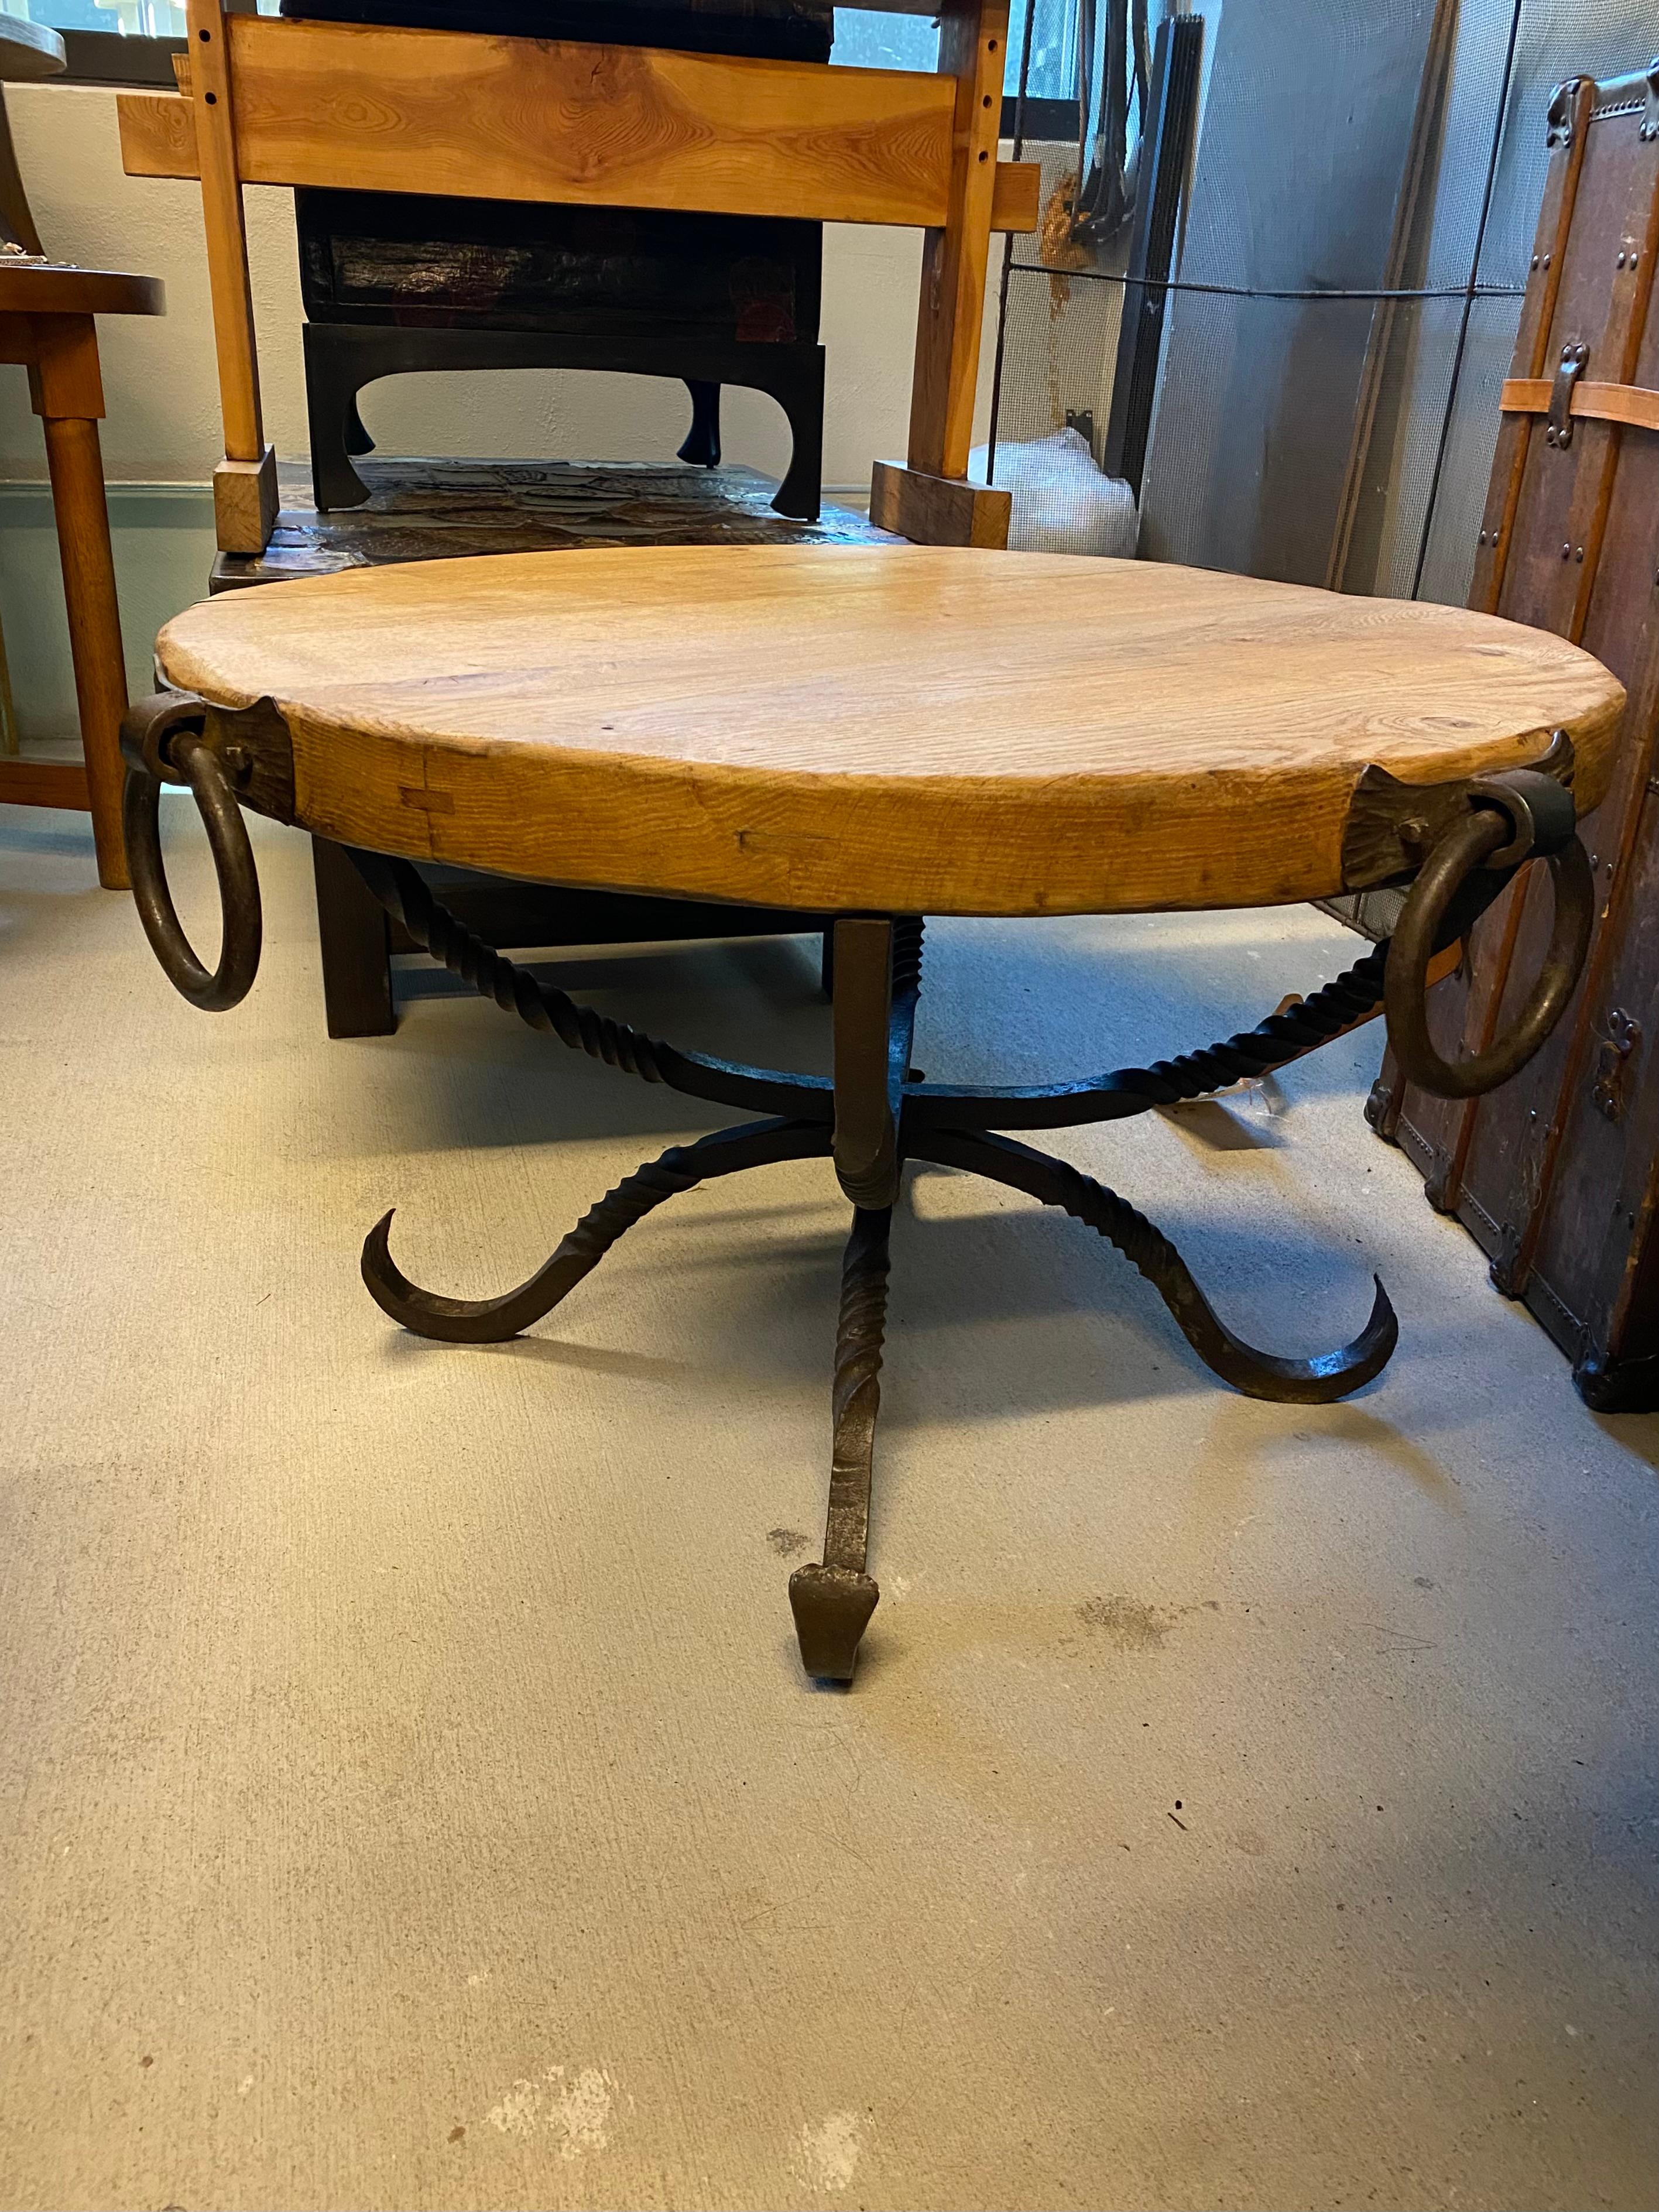 Heavy cocktail or side table with thick solid oak round top and forged iron base with well-scaled loop handles. Oak top is not stained and has natural wax finish. France, 1930-40's.